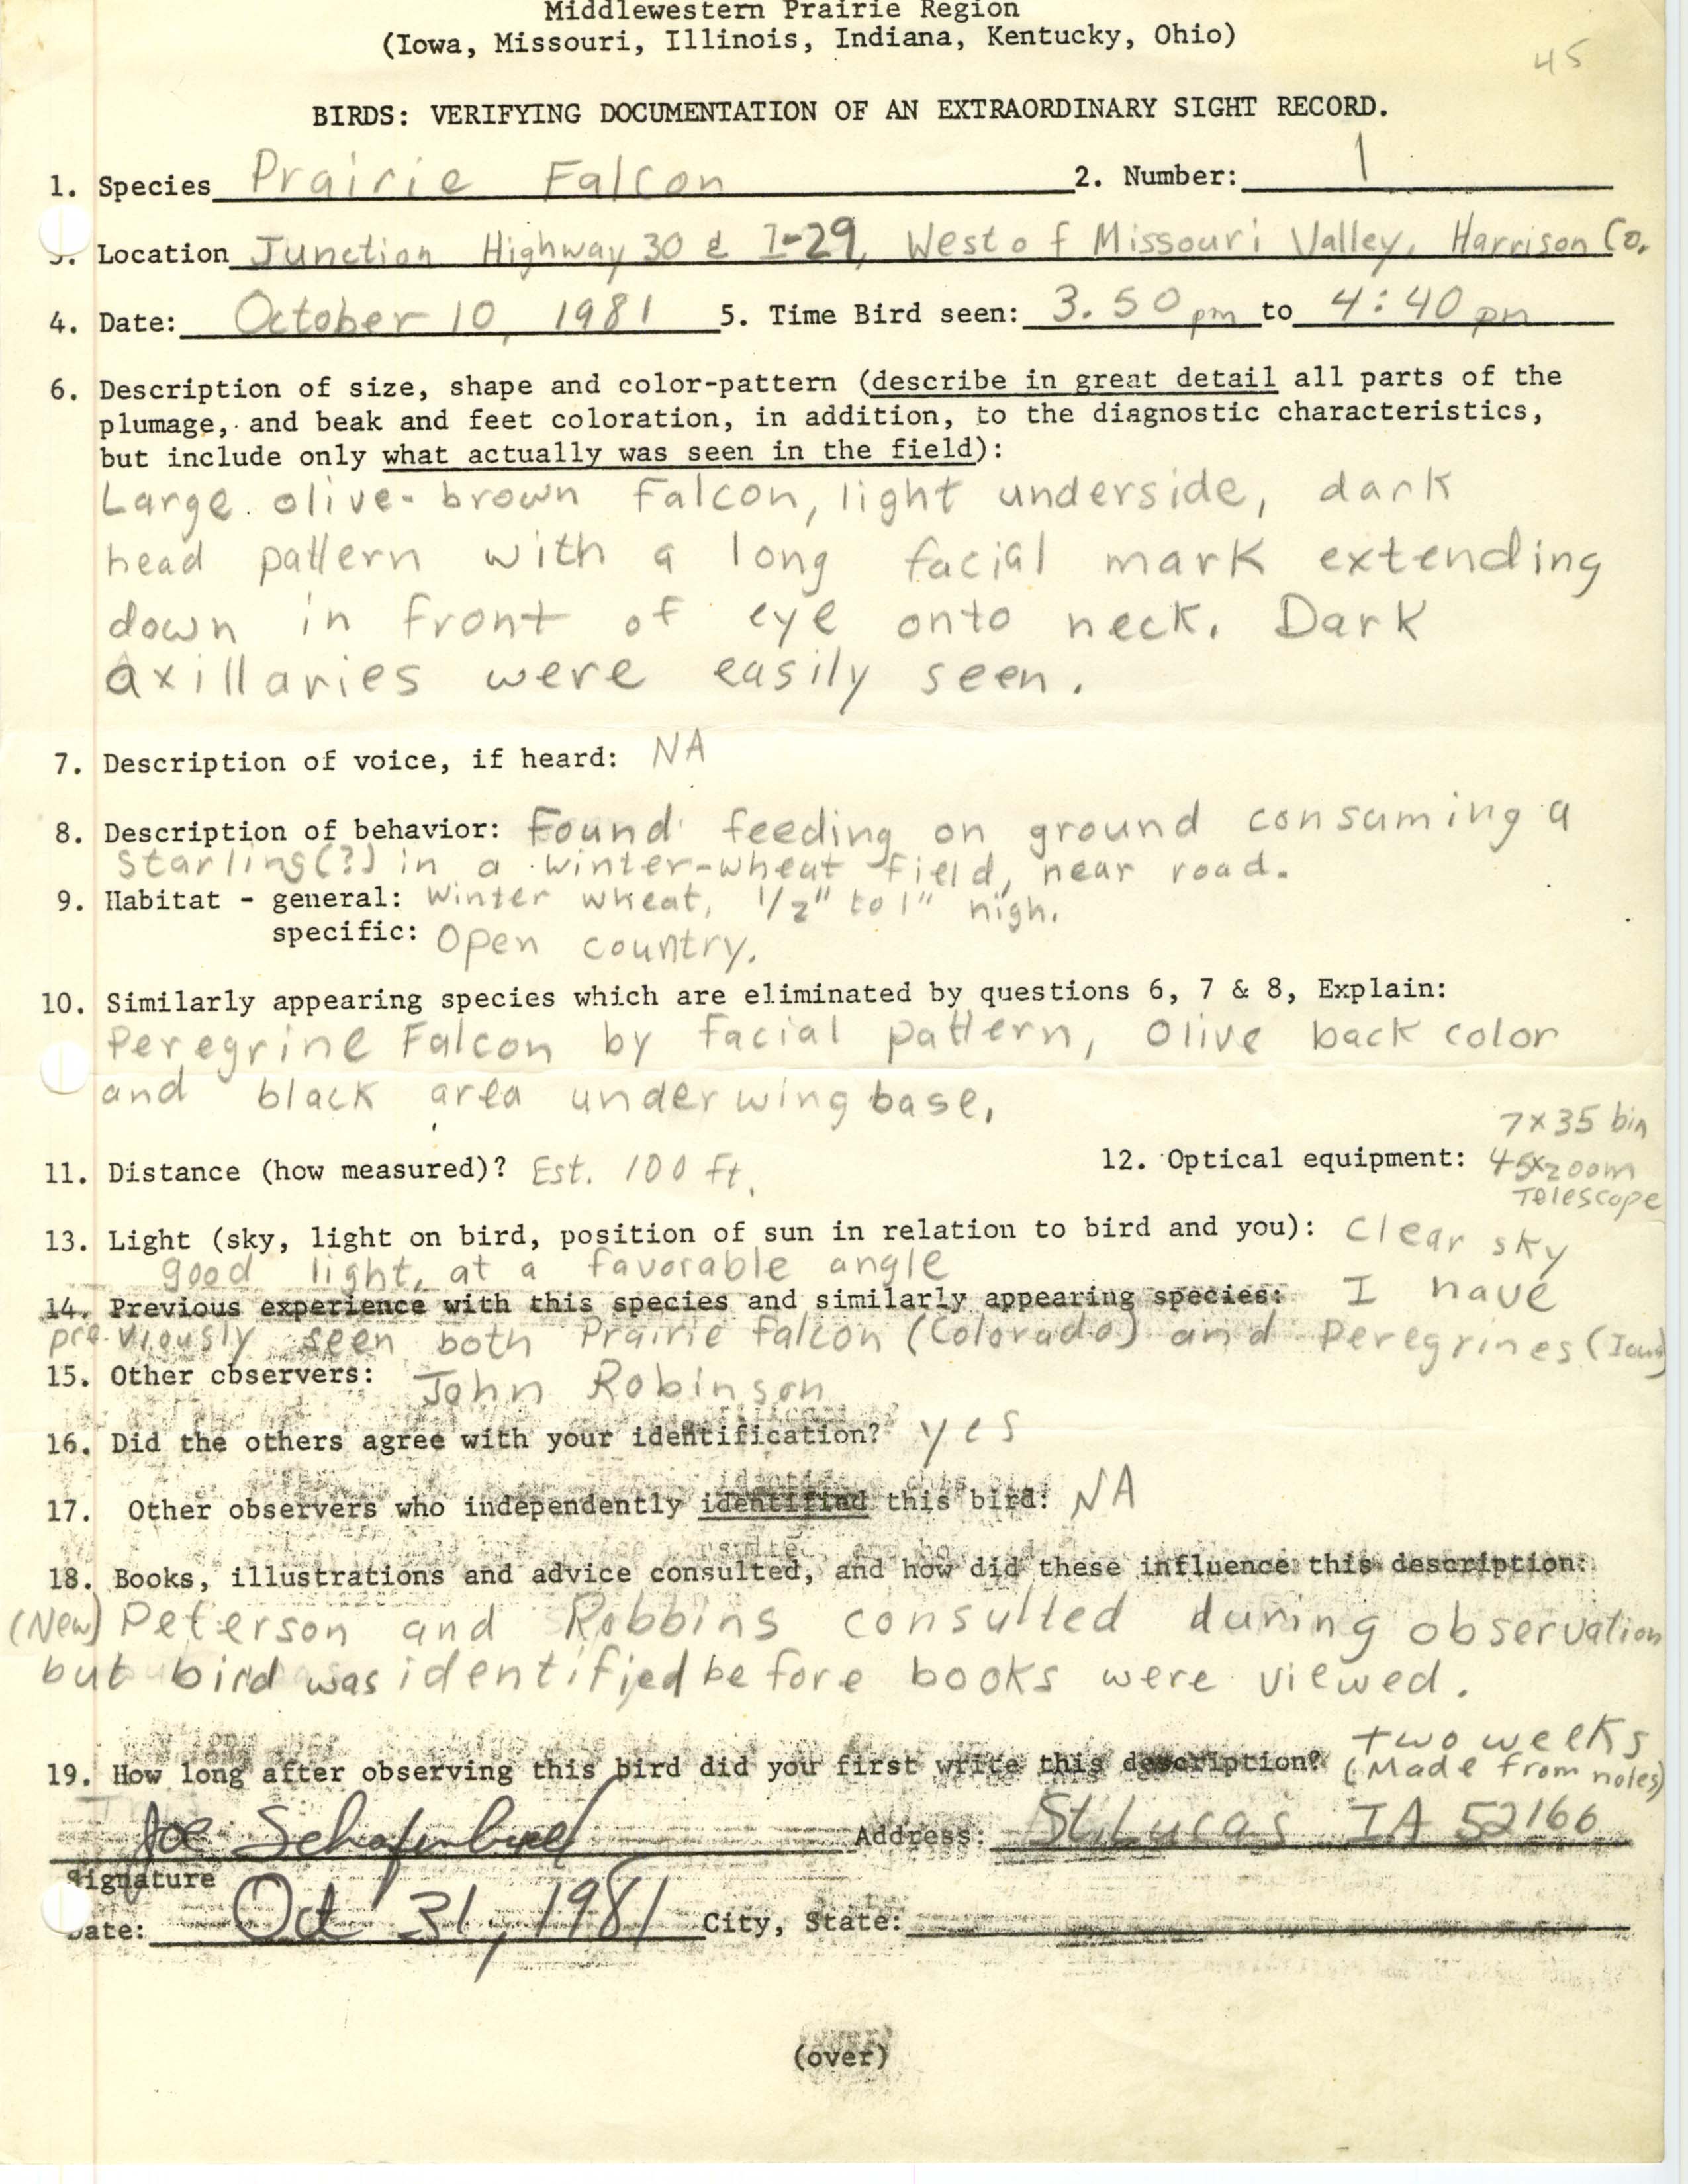 Rare bird documentation form for Prairie Falcon at junction of U.S. Route 30 and Interstate 29 in 1981